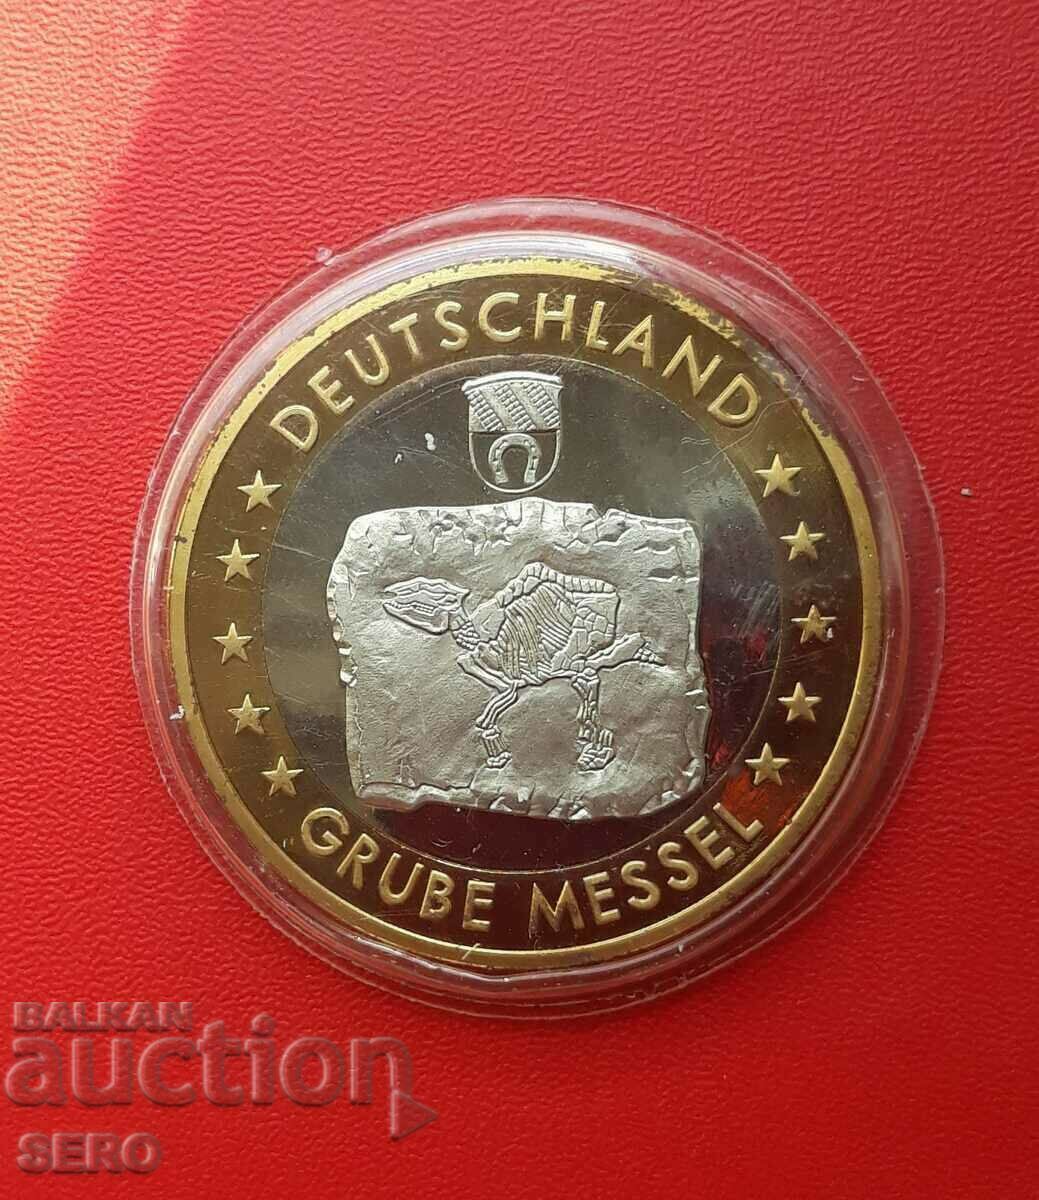 Germany-medal or plaque